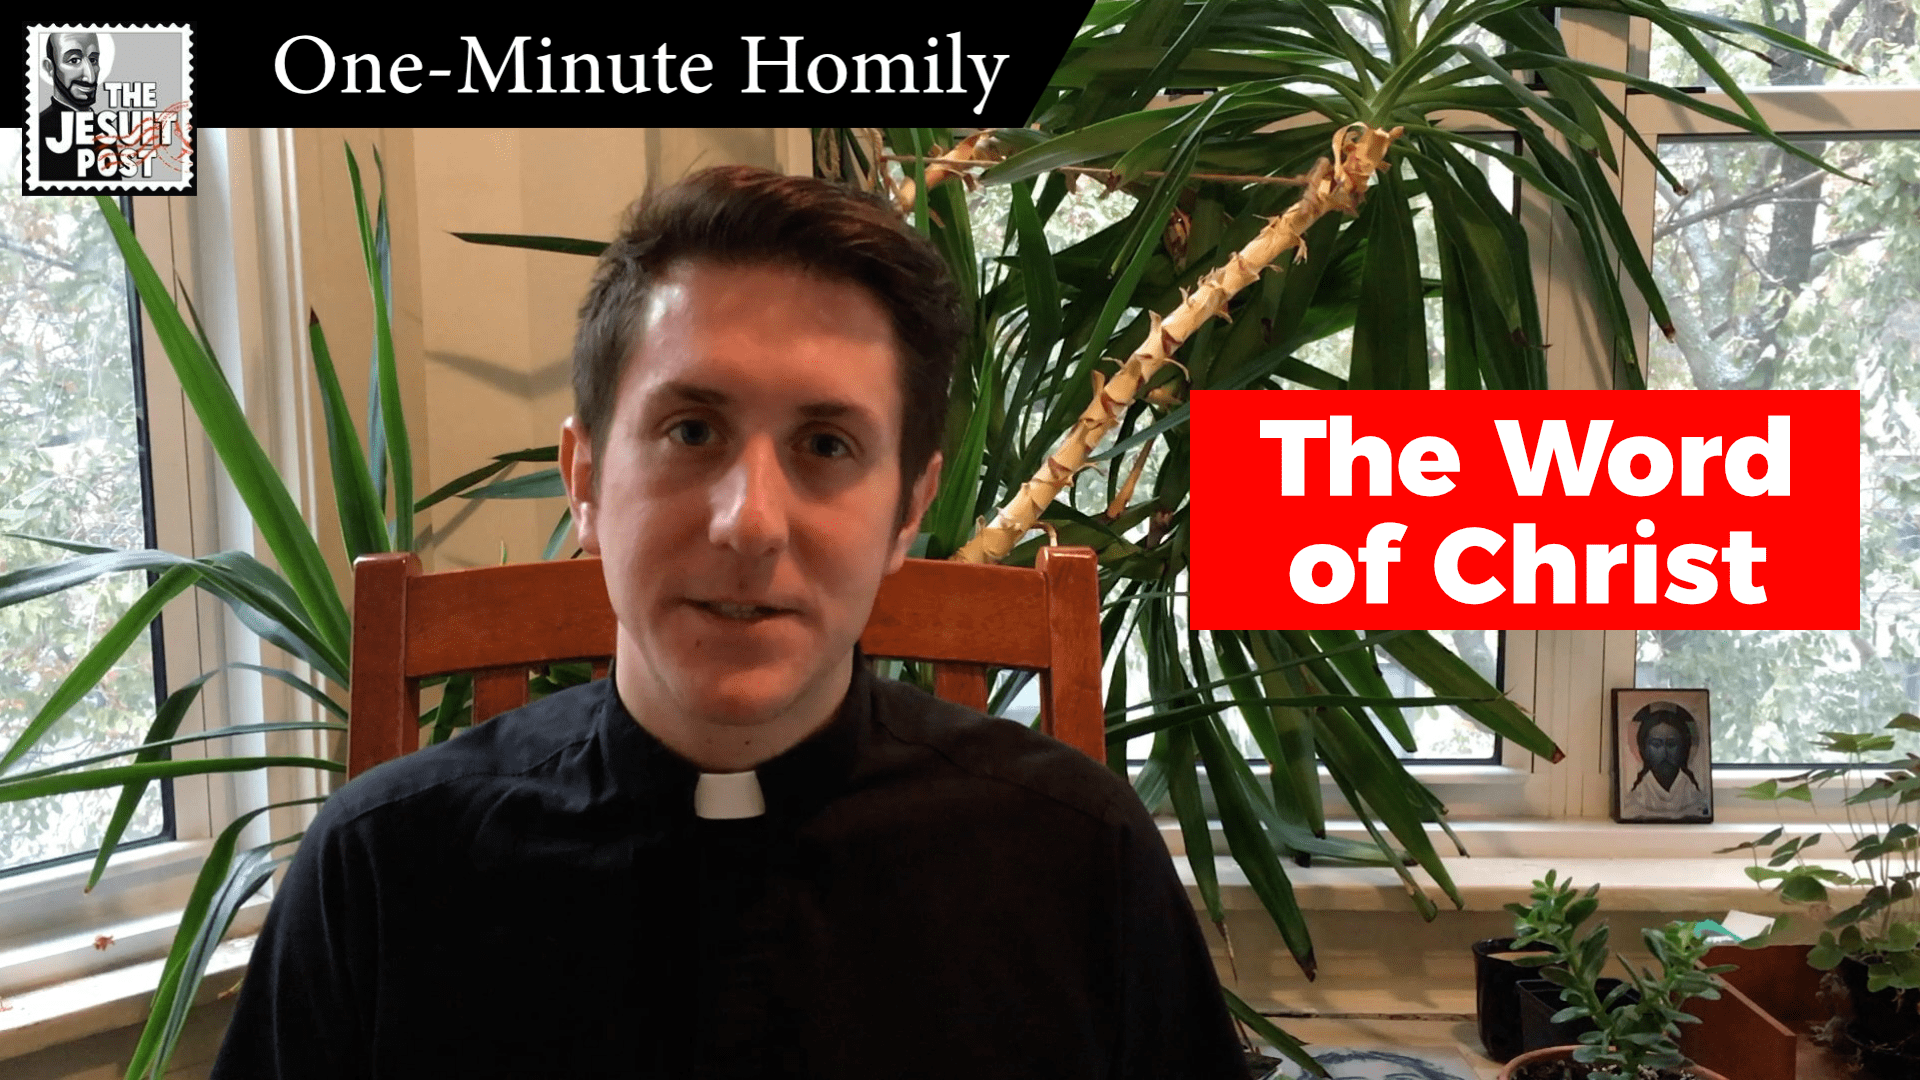 One-Minute Homily: “The Word of Christ”